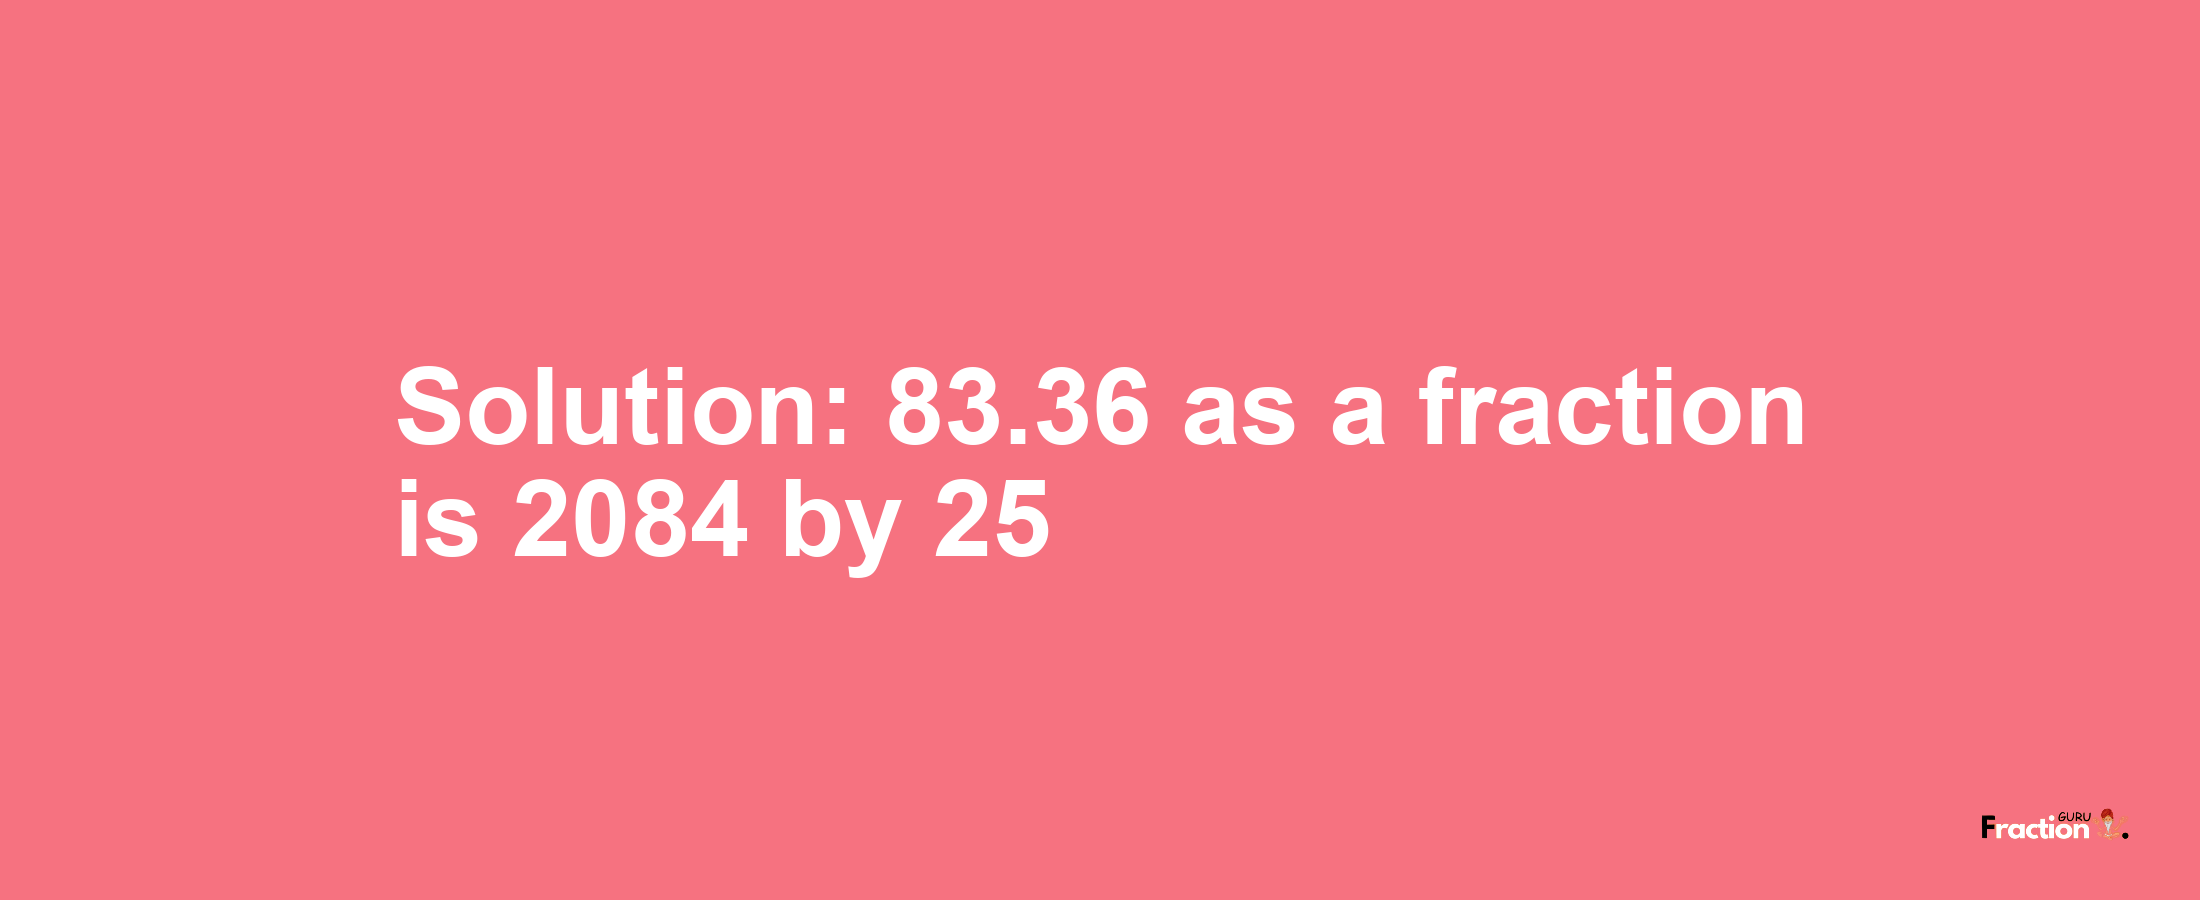 Solution:83.36 as a fraction is 2084/25